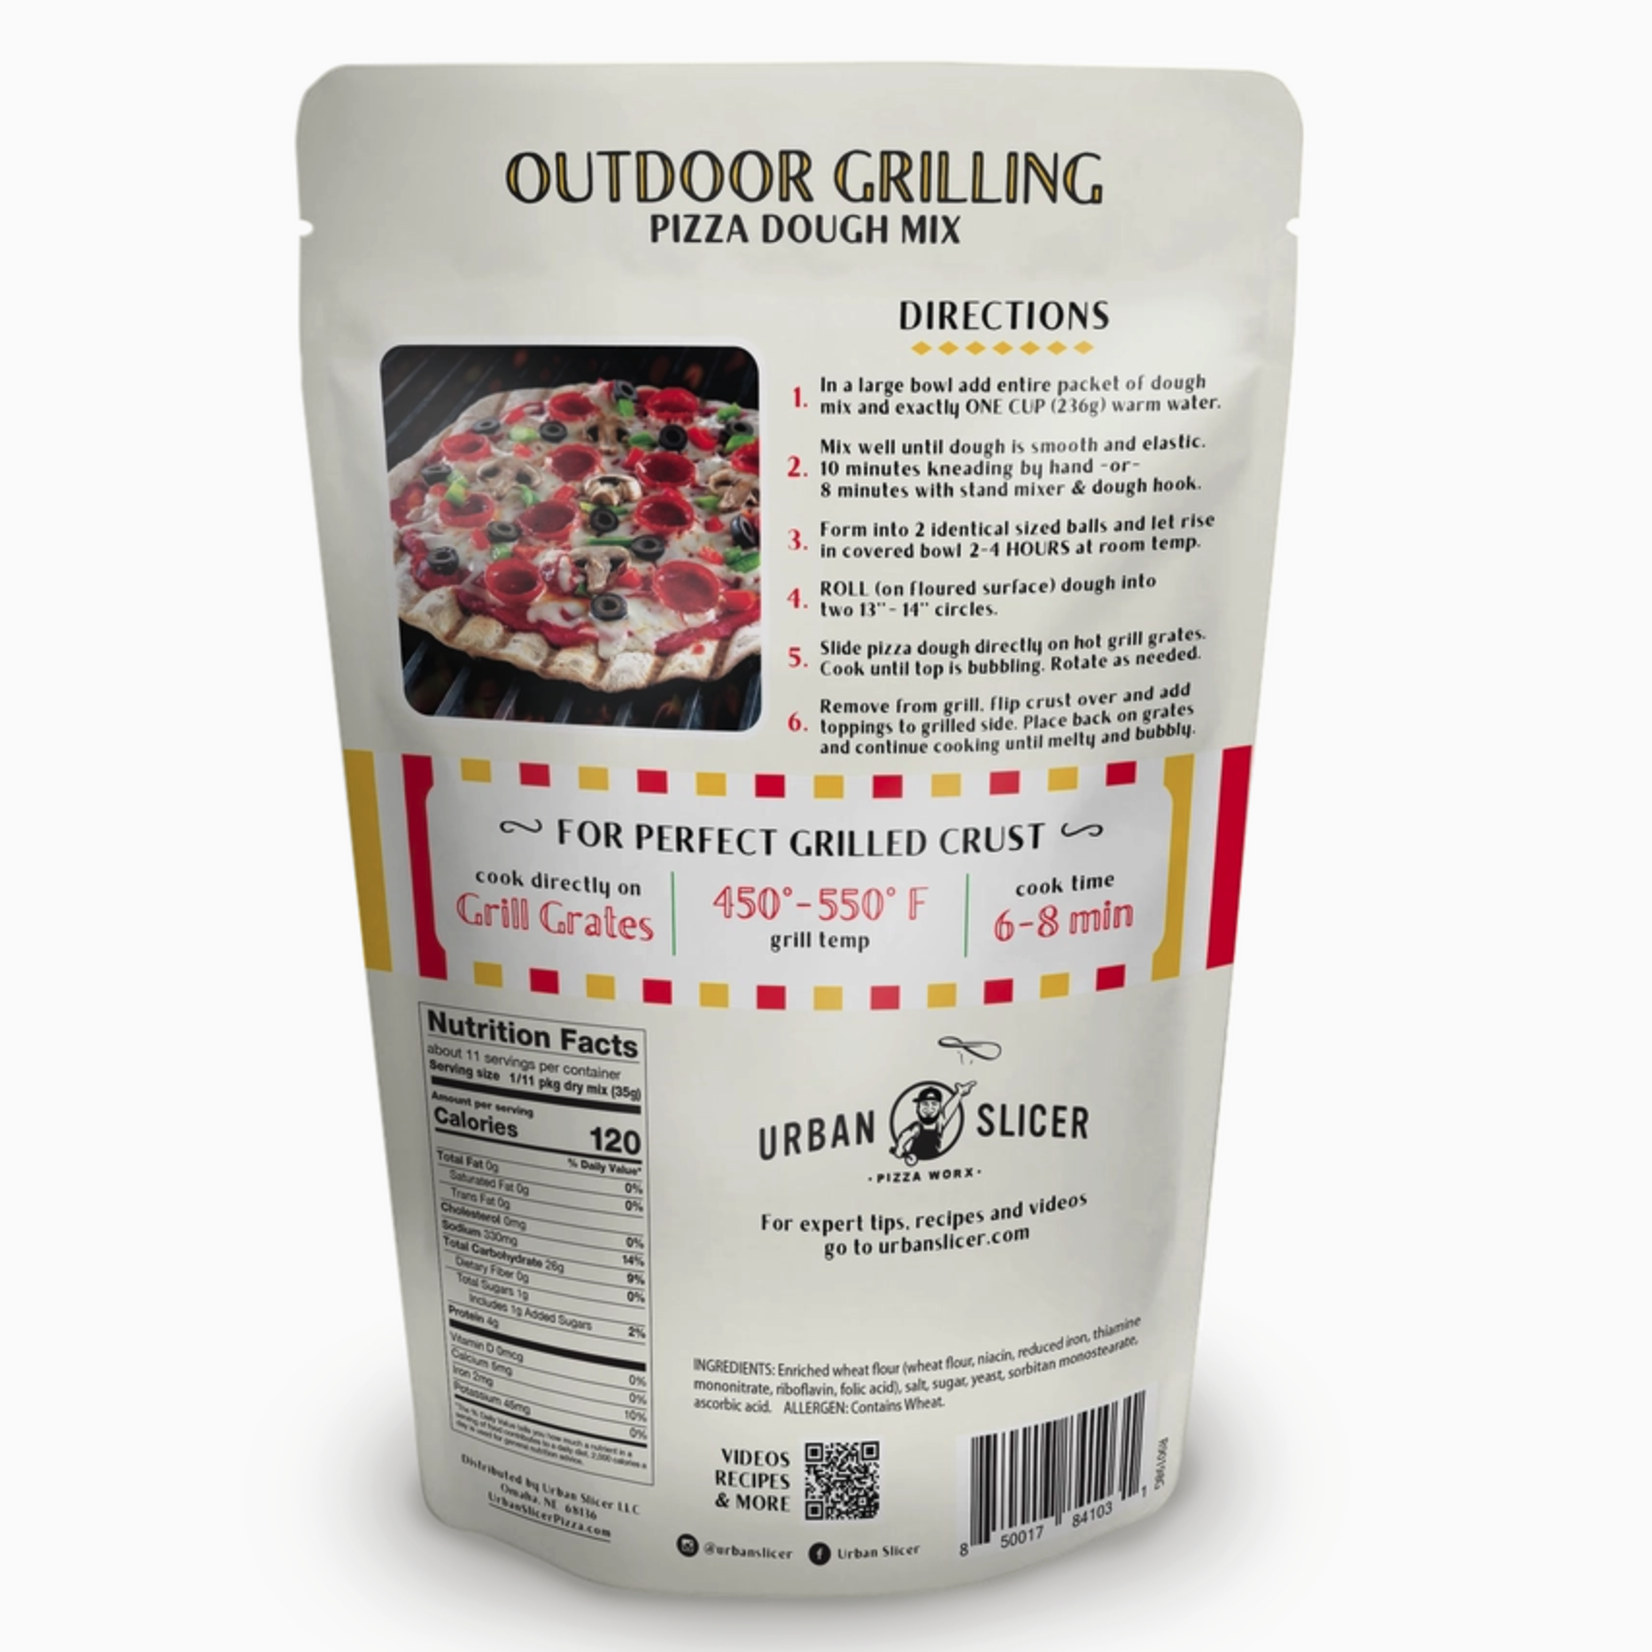 Urban Slicer Pizza Worx Outdoor Grilling Pizza Dough